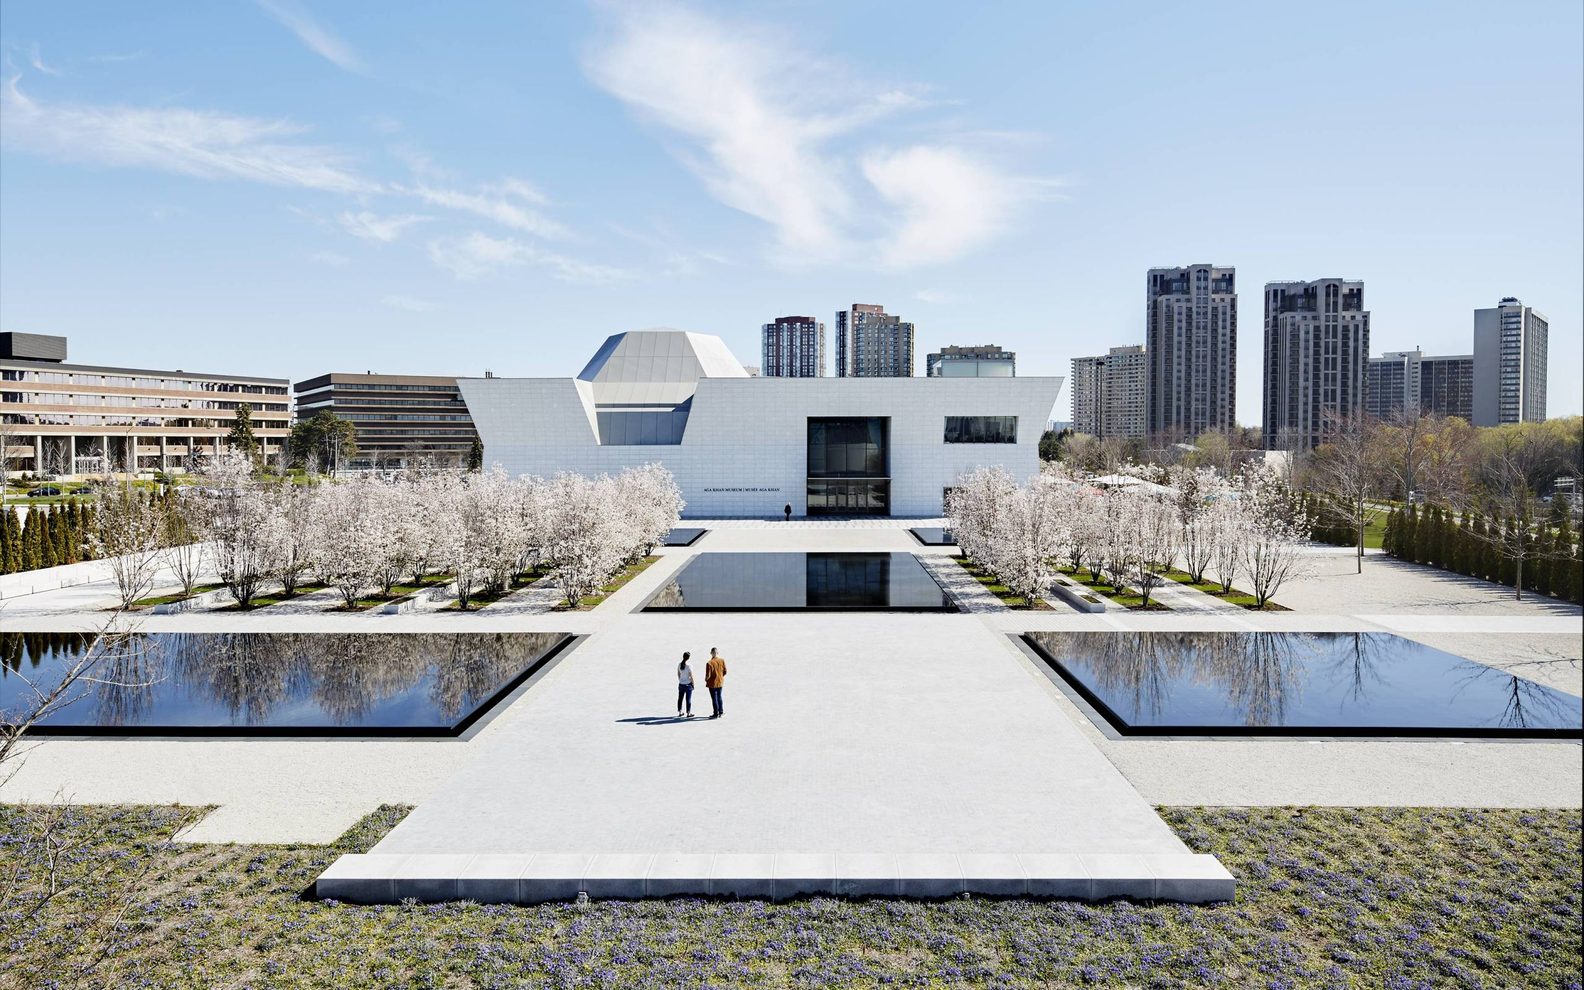 Two people viewing the front entrance of the Aga Khan Museum from the courtyard